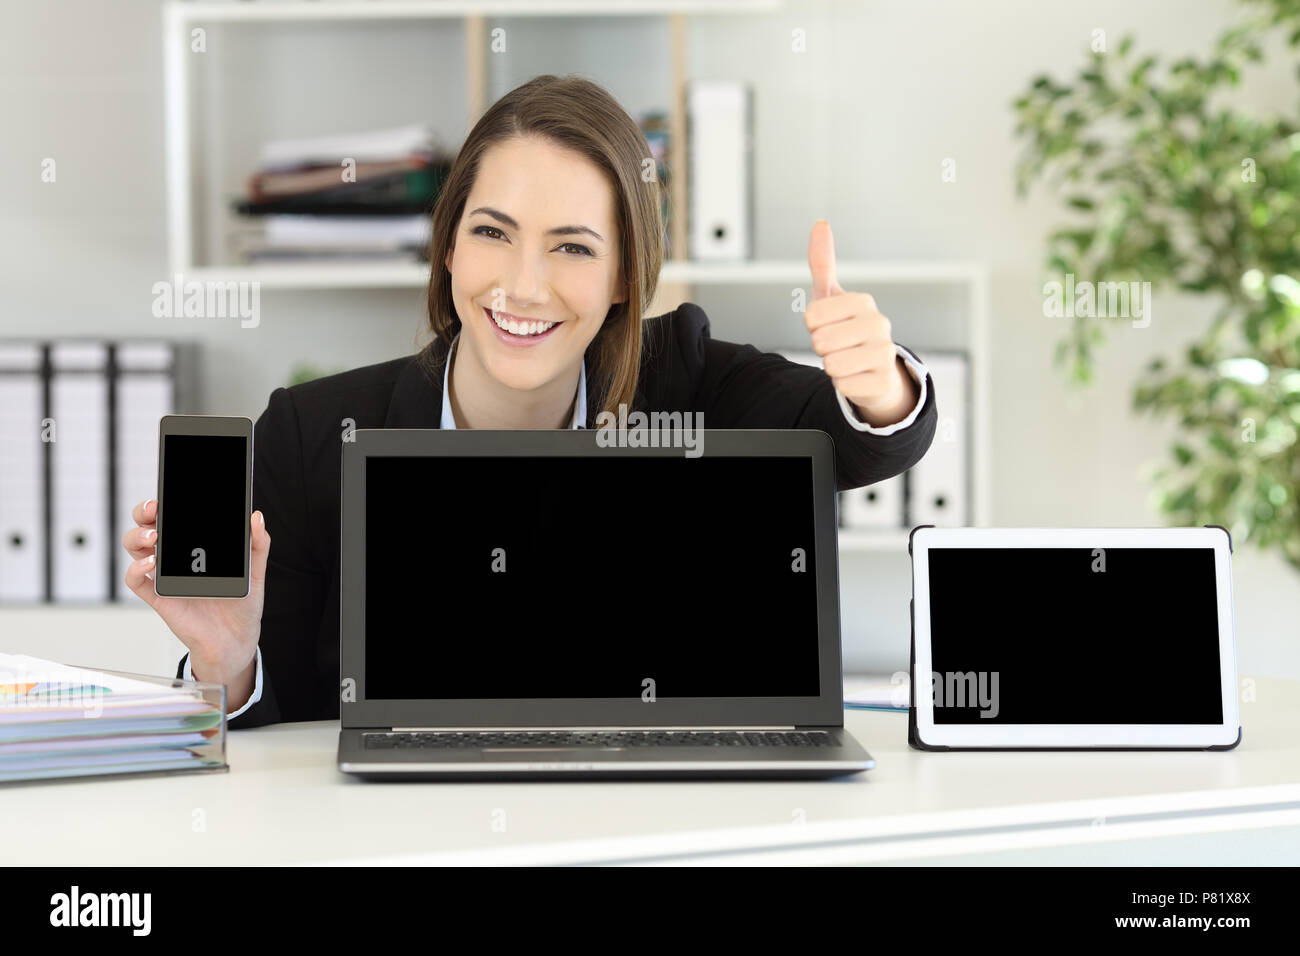 Office worker showing multiple device screens a laptop tablet and phone mockups Stock Photo